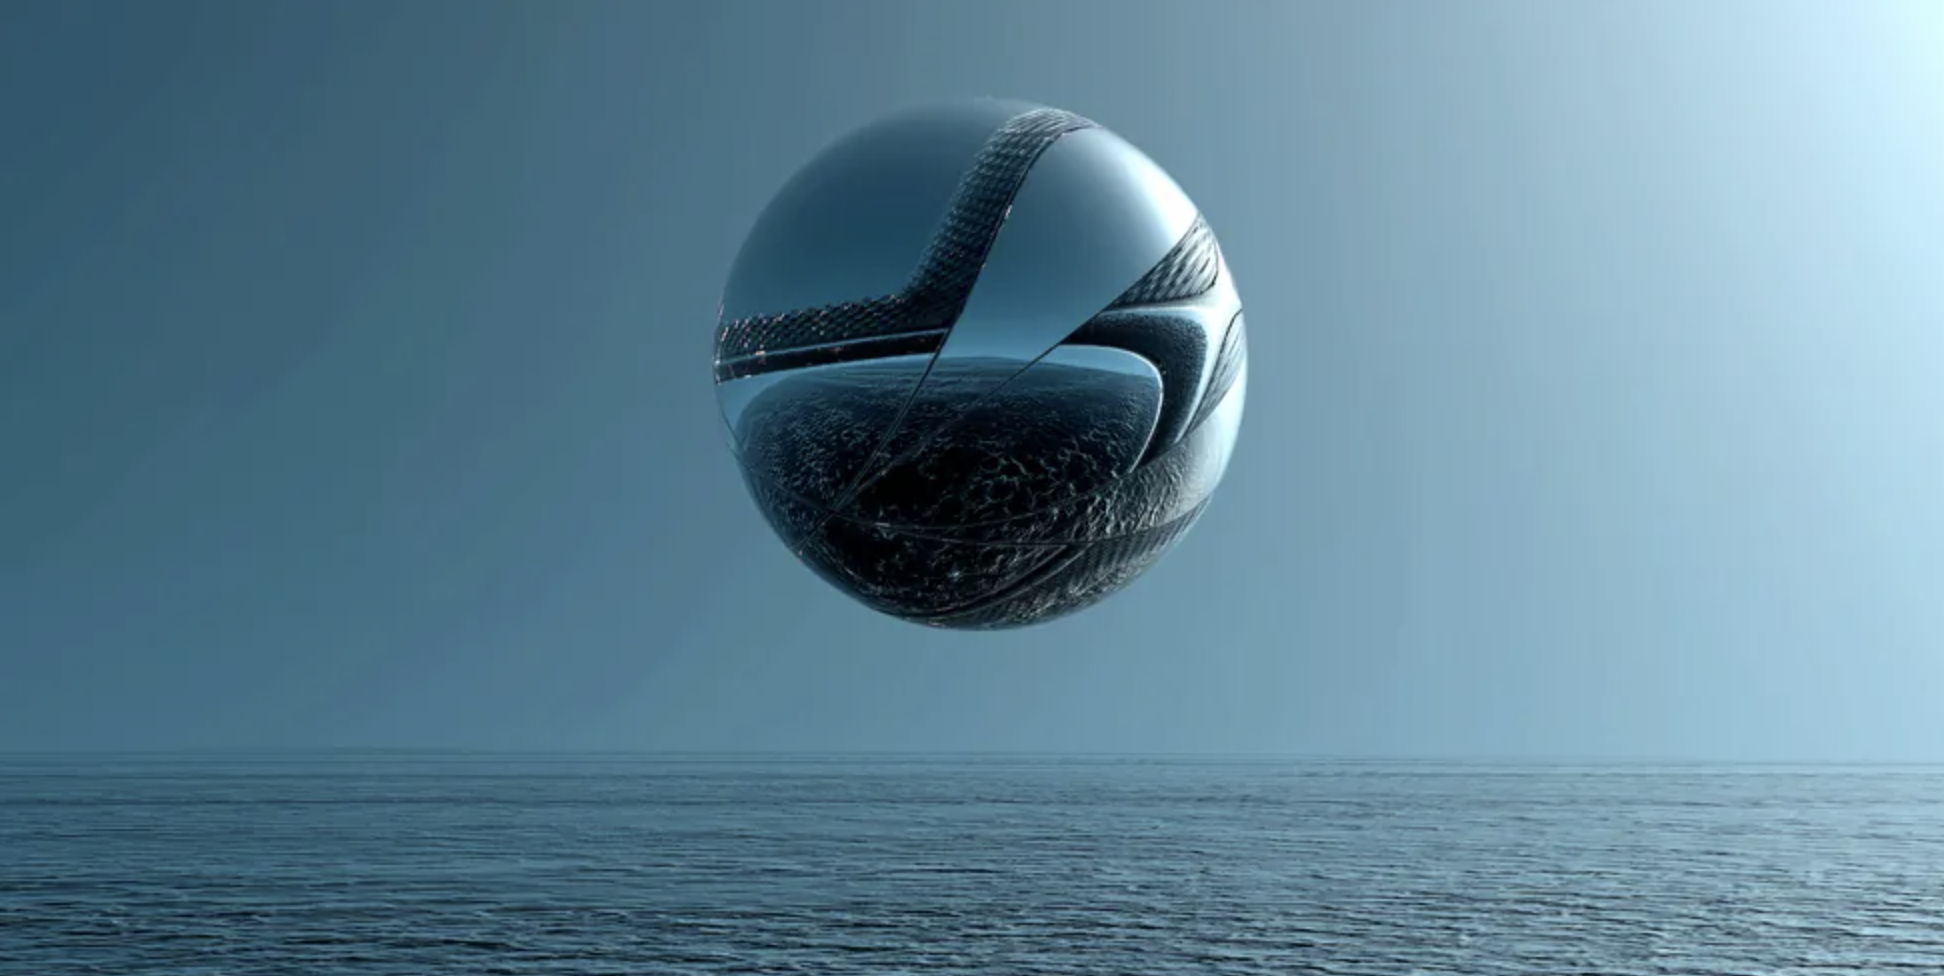 An illustration of a massive UFO hovering above the ocean. Image Credit Depositphotos.